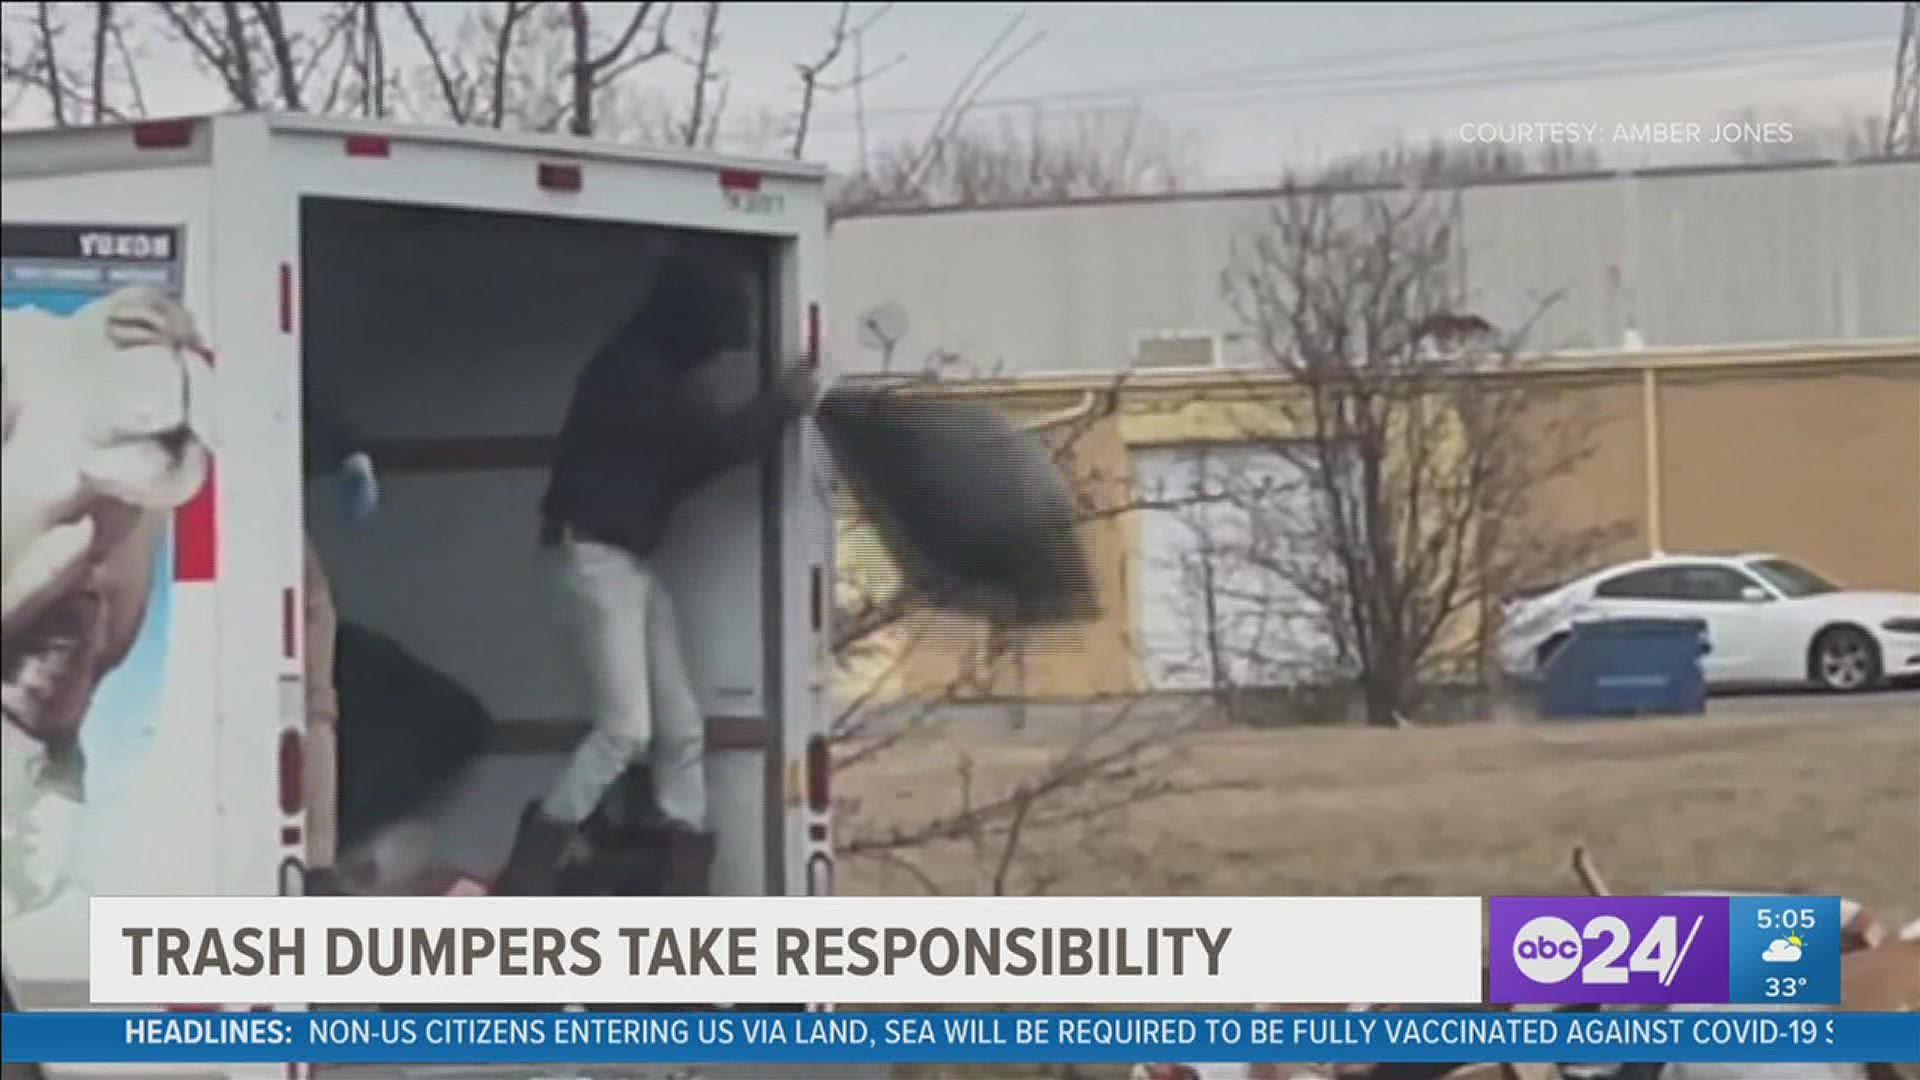 The men apologized after being caught on camera dumping trash in front of Memphis businesses, and will clean up the mess.